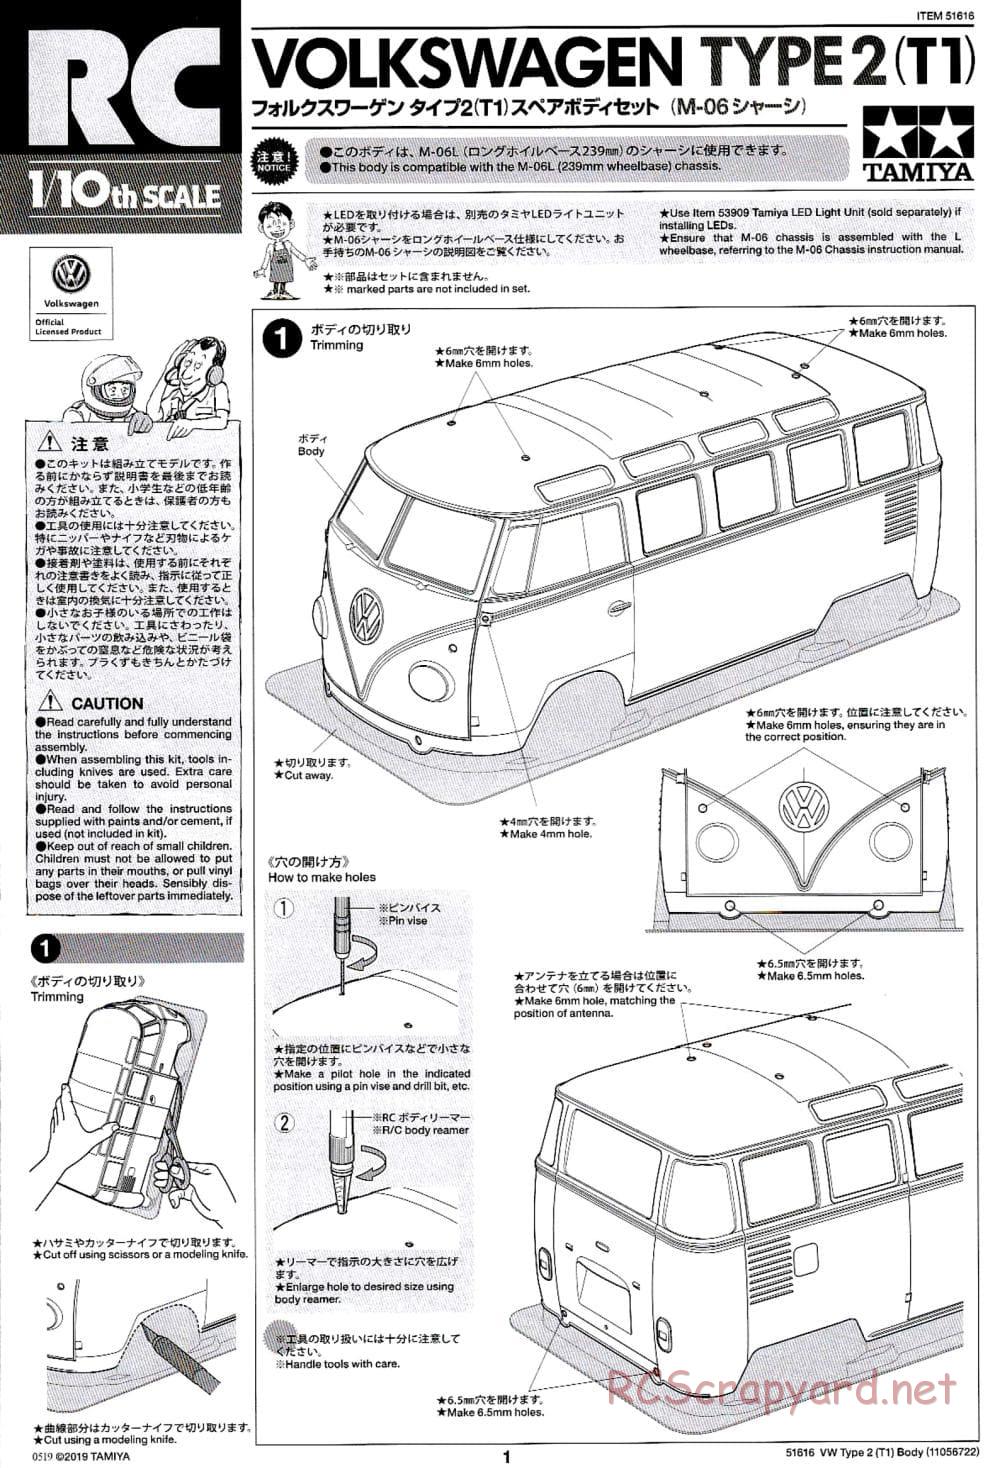 Tamiya - Volkswagen Type 2 (T1) - M-06 Chassis - Body Manual - Page 1